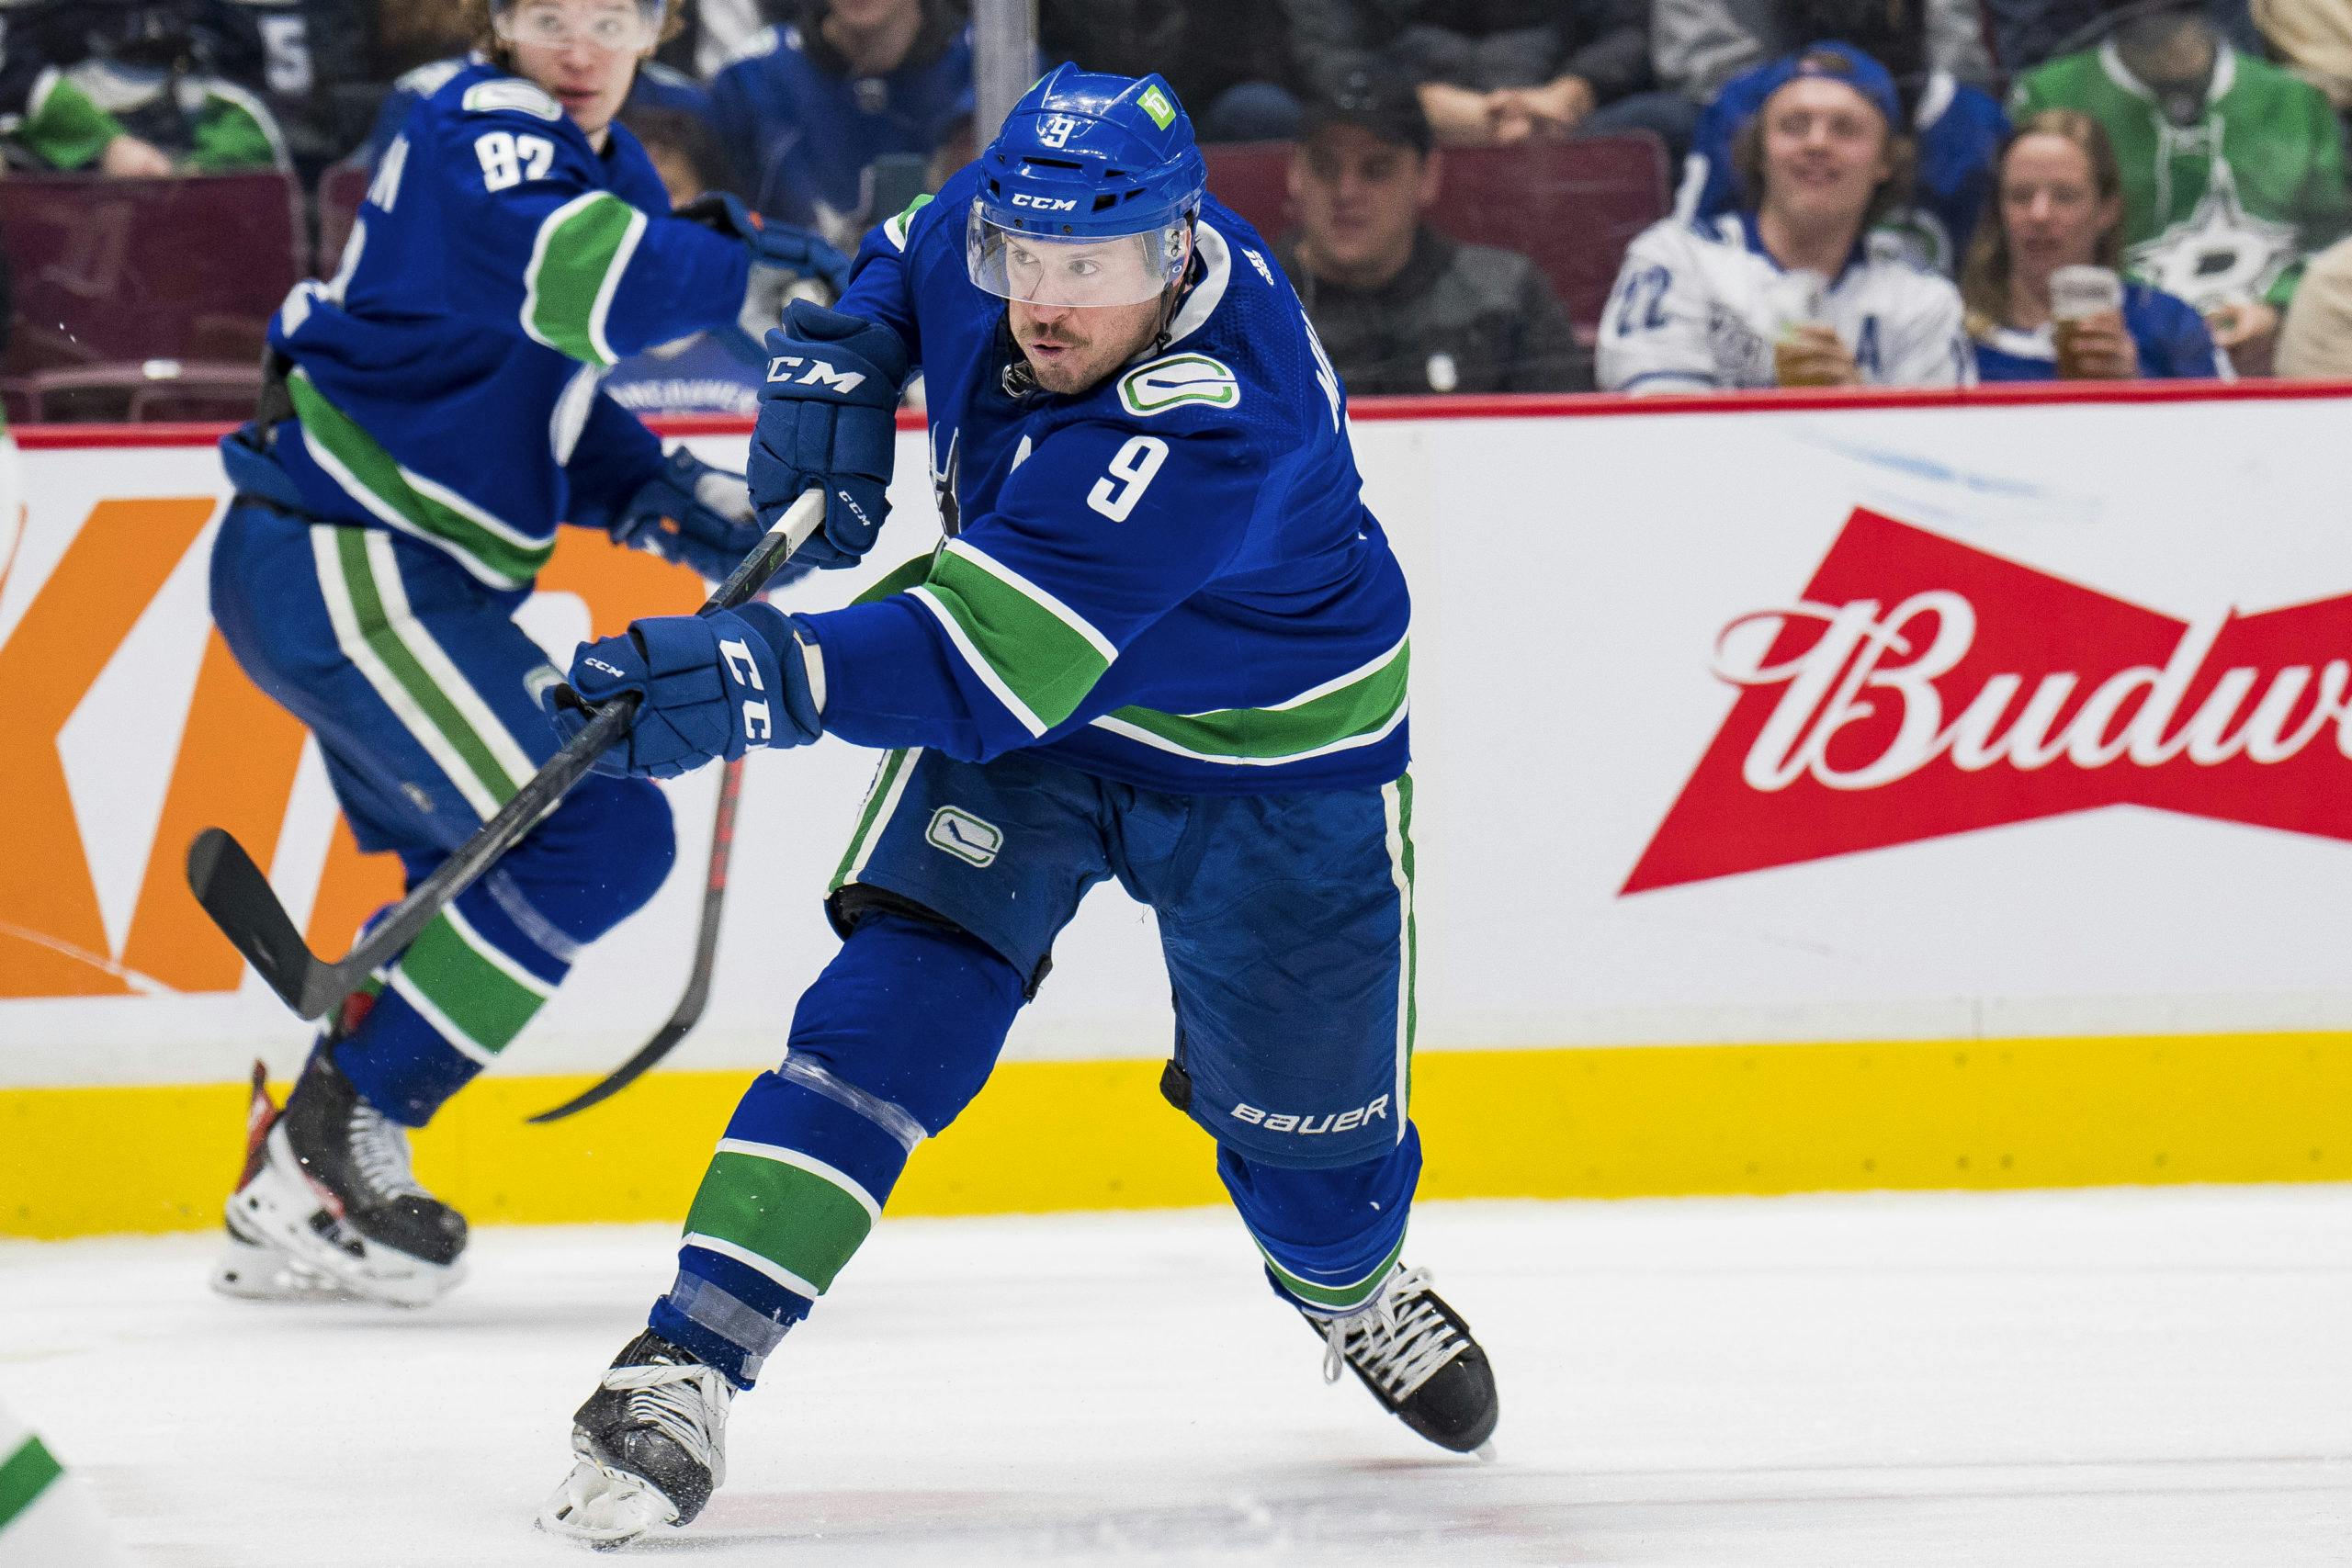 Not officially retired, Bieksa wants to sign one-day contract with Canucks